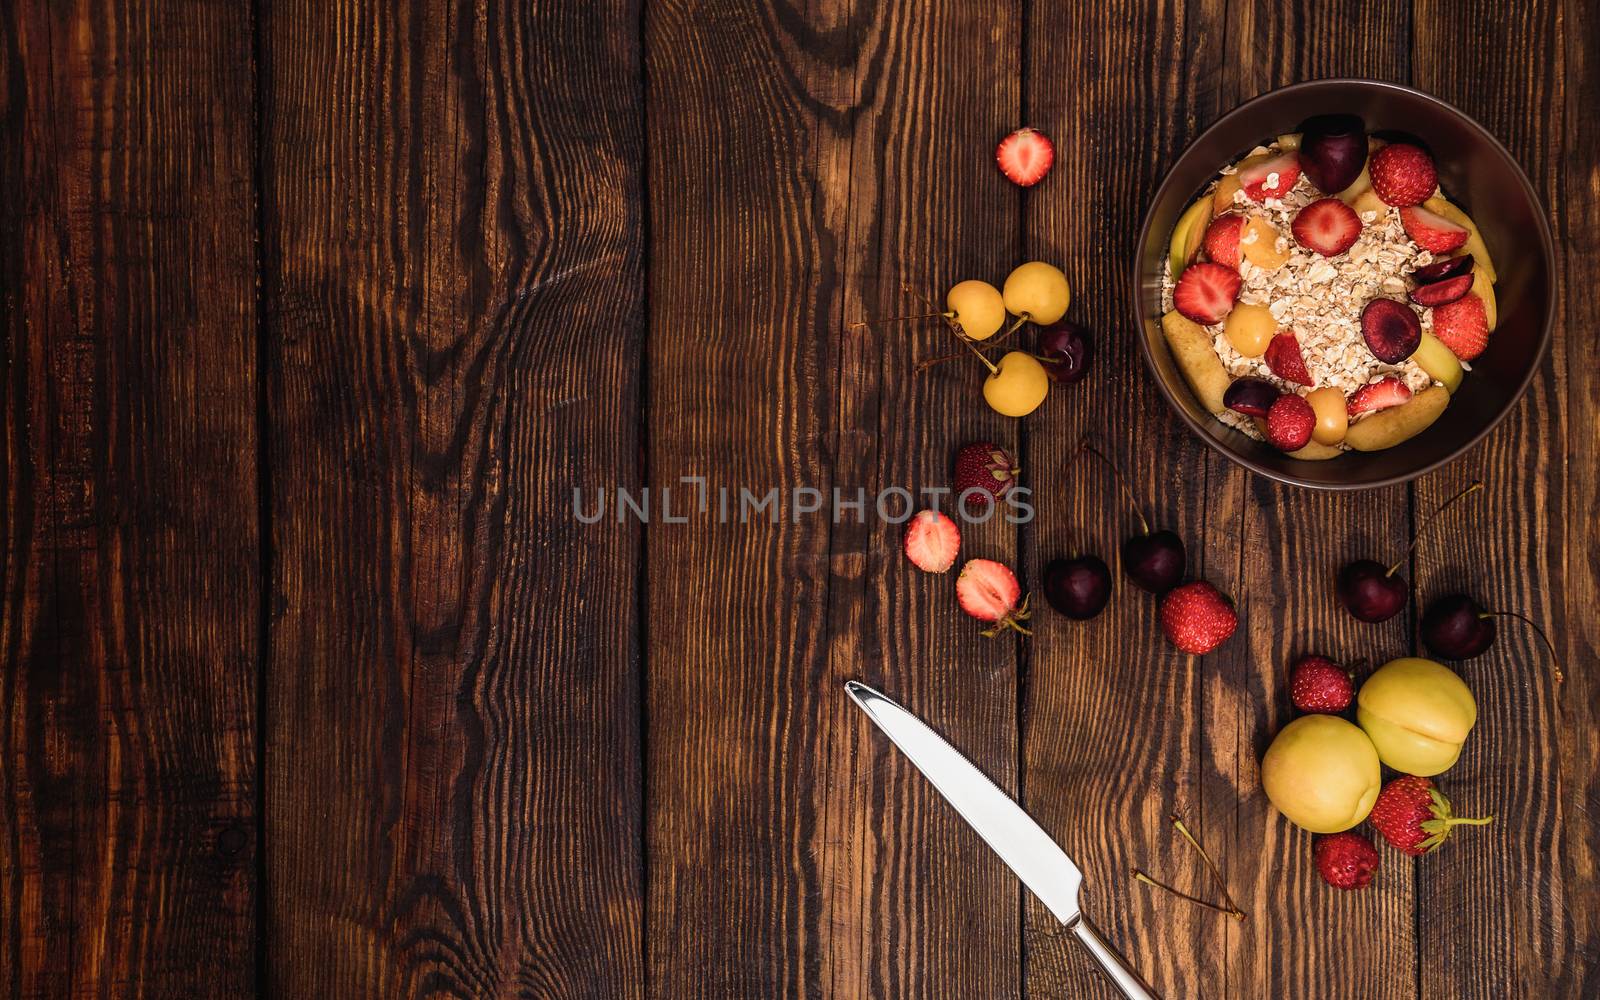 Breakfast with porridge, fruits and berries on weathered wooden textured table on background or old panels with cracks, scratches, swirls